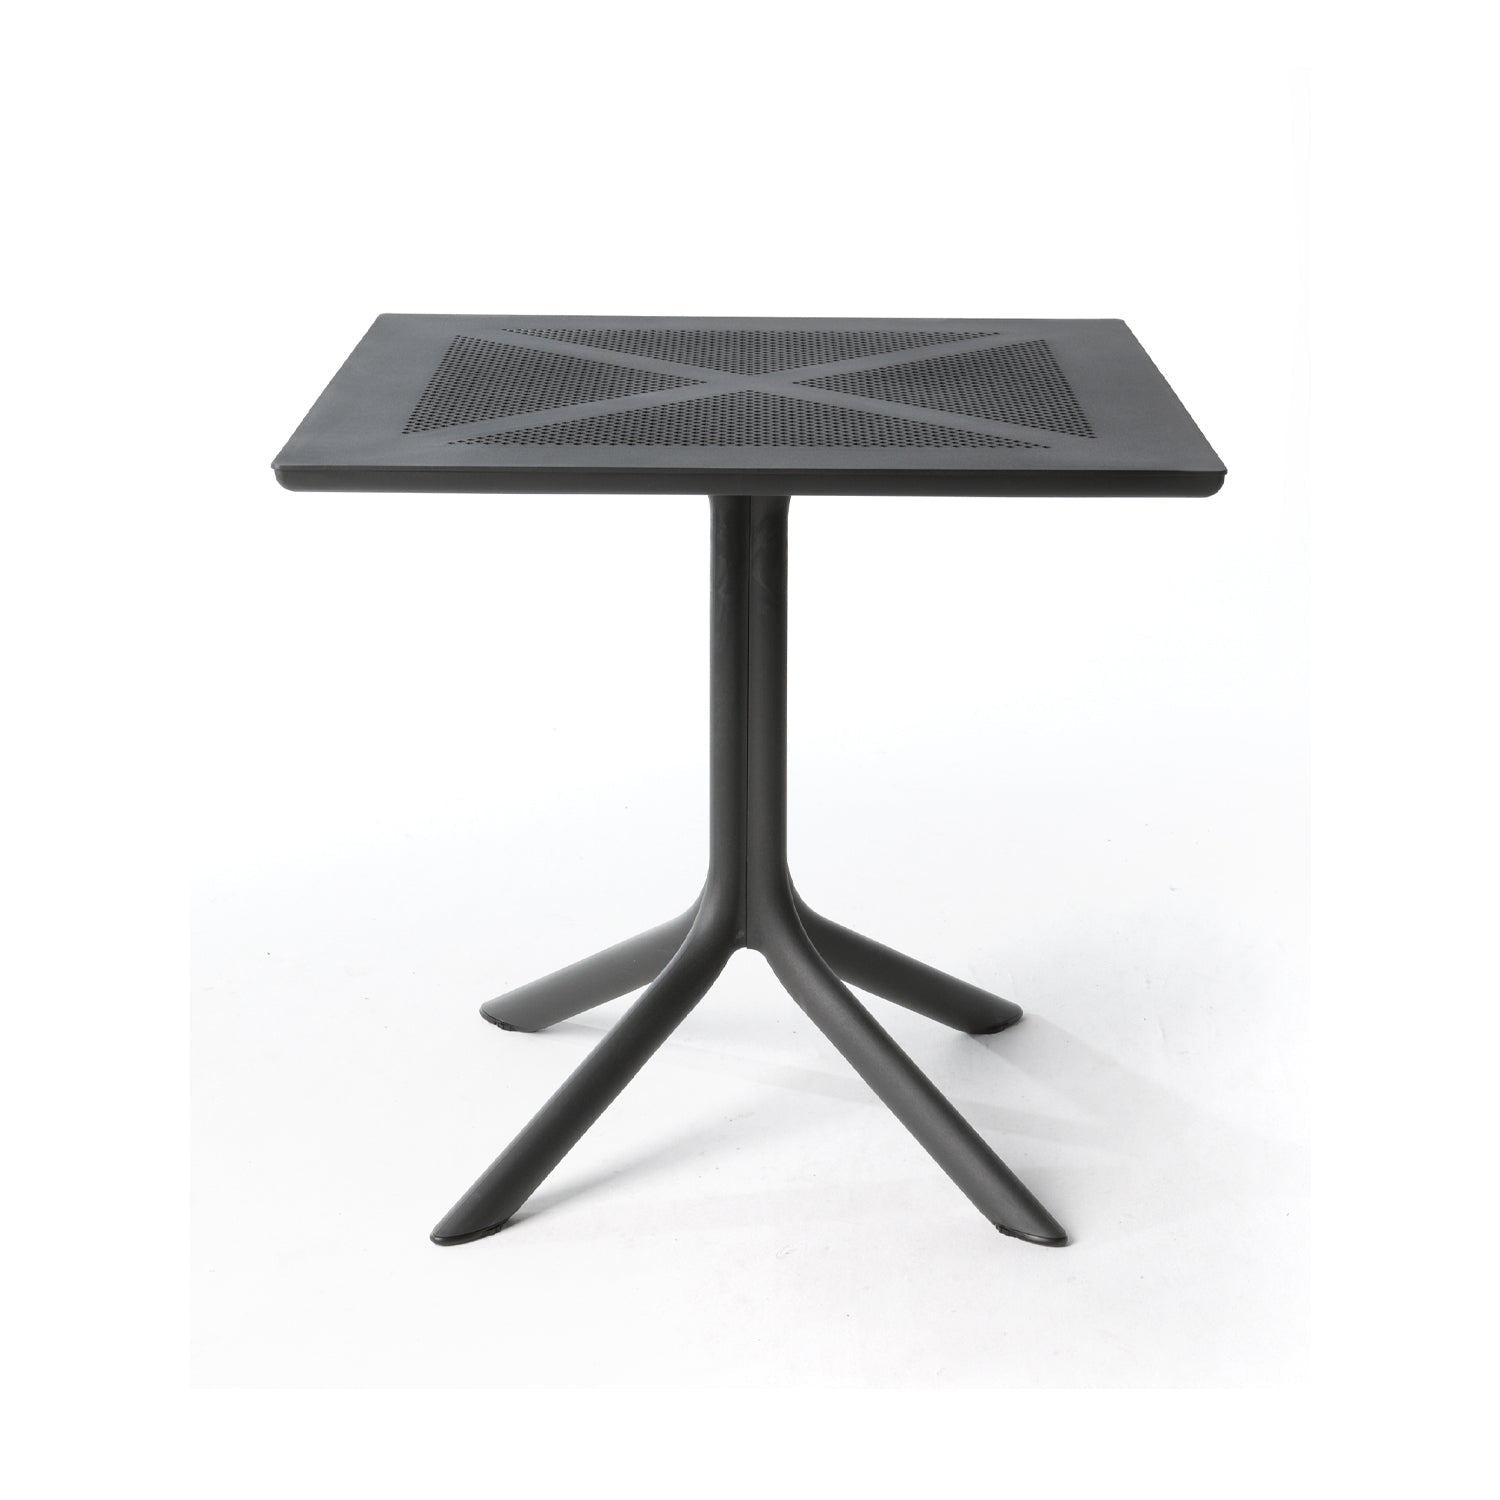 ClipX 80cm Garden Table By Nardi In Anthracite